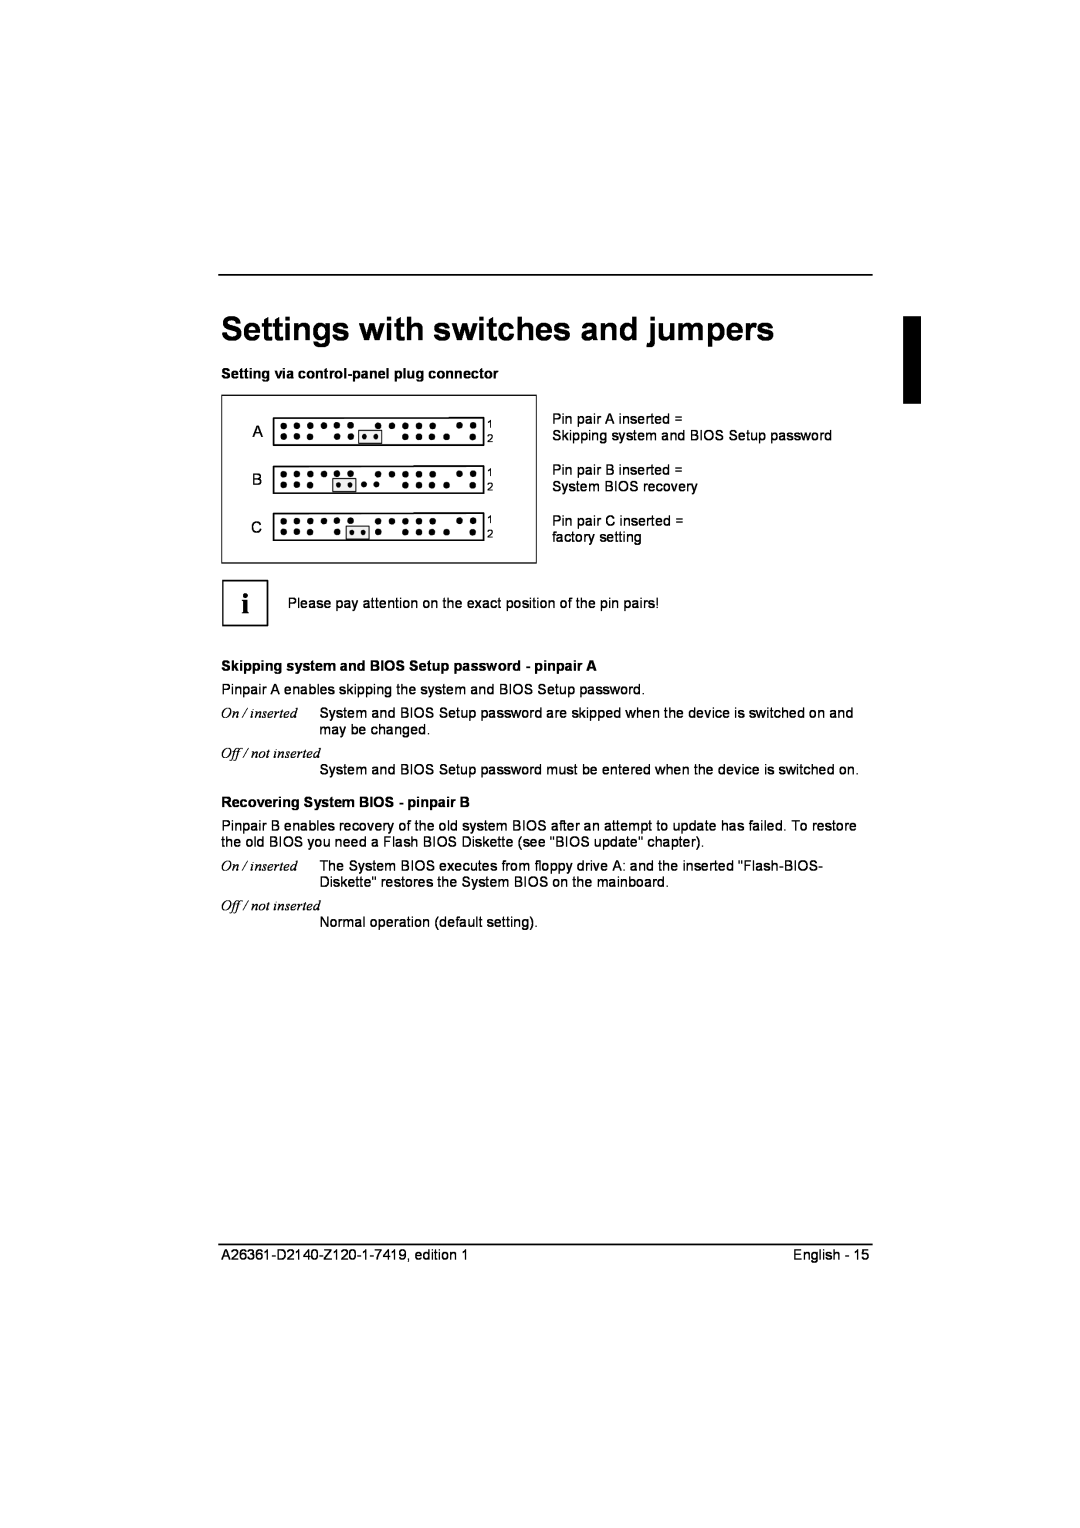 Eclipse - Fujitsu Ten D2140 technical manual Settings with switches and jumpers, Setting via control-panel plug connector 